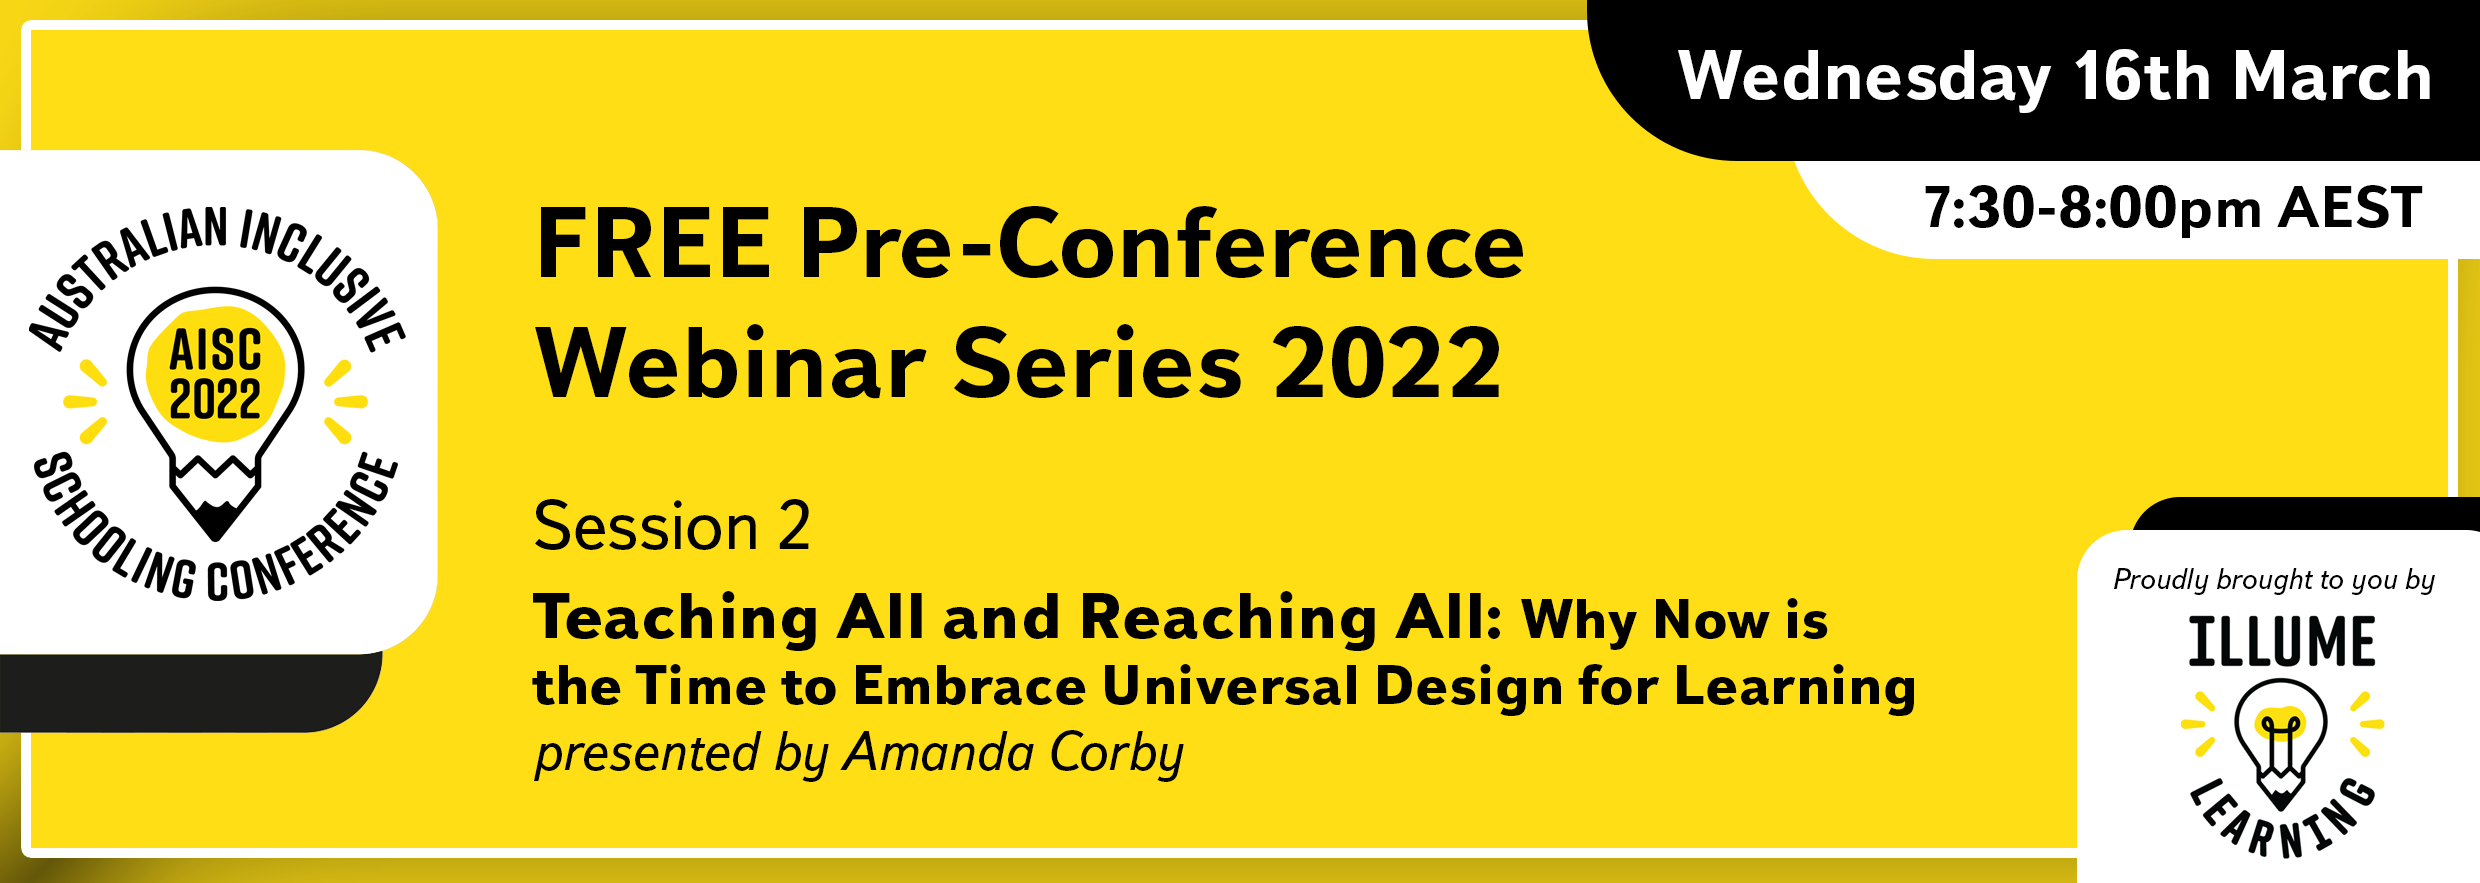 Image Description: Black text on a yellow background reads 'Australian Inclusive Schooling Conference, 'FREE Pre-conference Webinar Series 2022. Session 2. Teaching All and Reaching All: Why Now is the Time to Embrace Universal Design for Learning. presented by Amanda Corby. Wednesday 16nd March 7:30-8:00pm AEST. Proudly brought to you by Illume Learning'